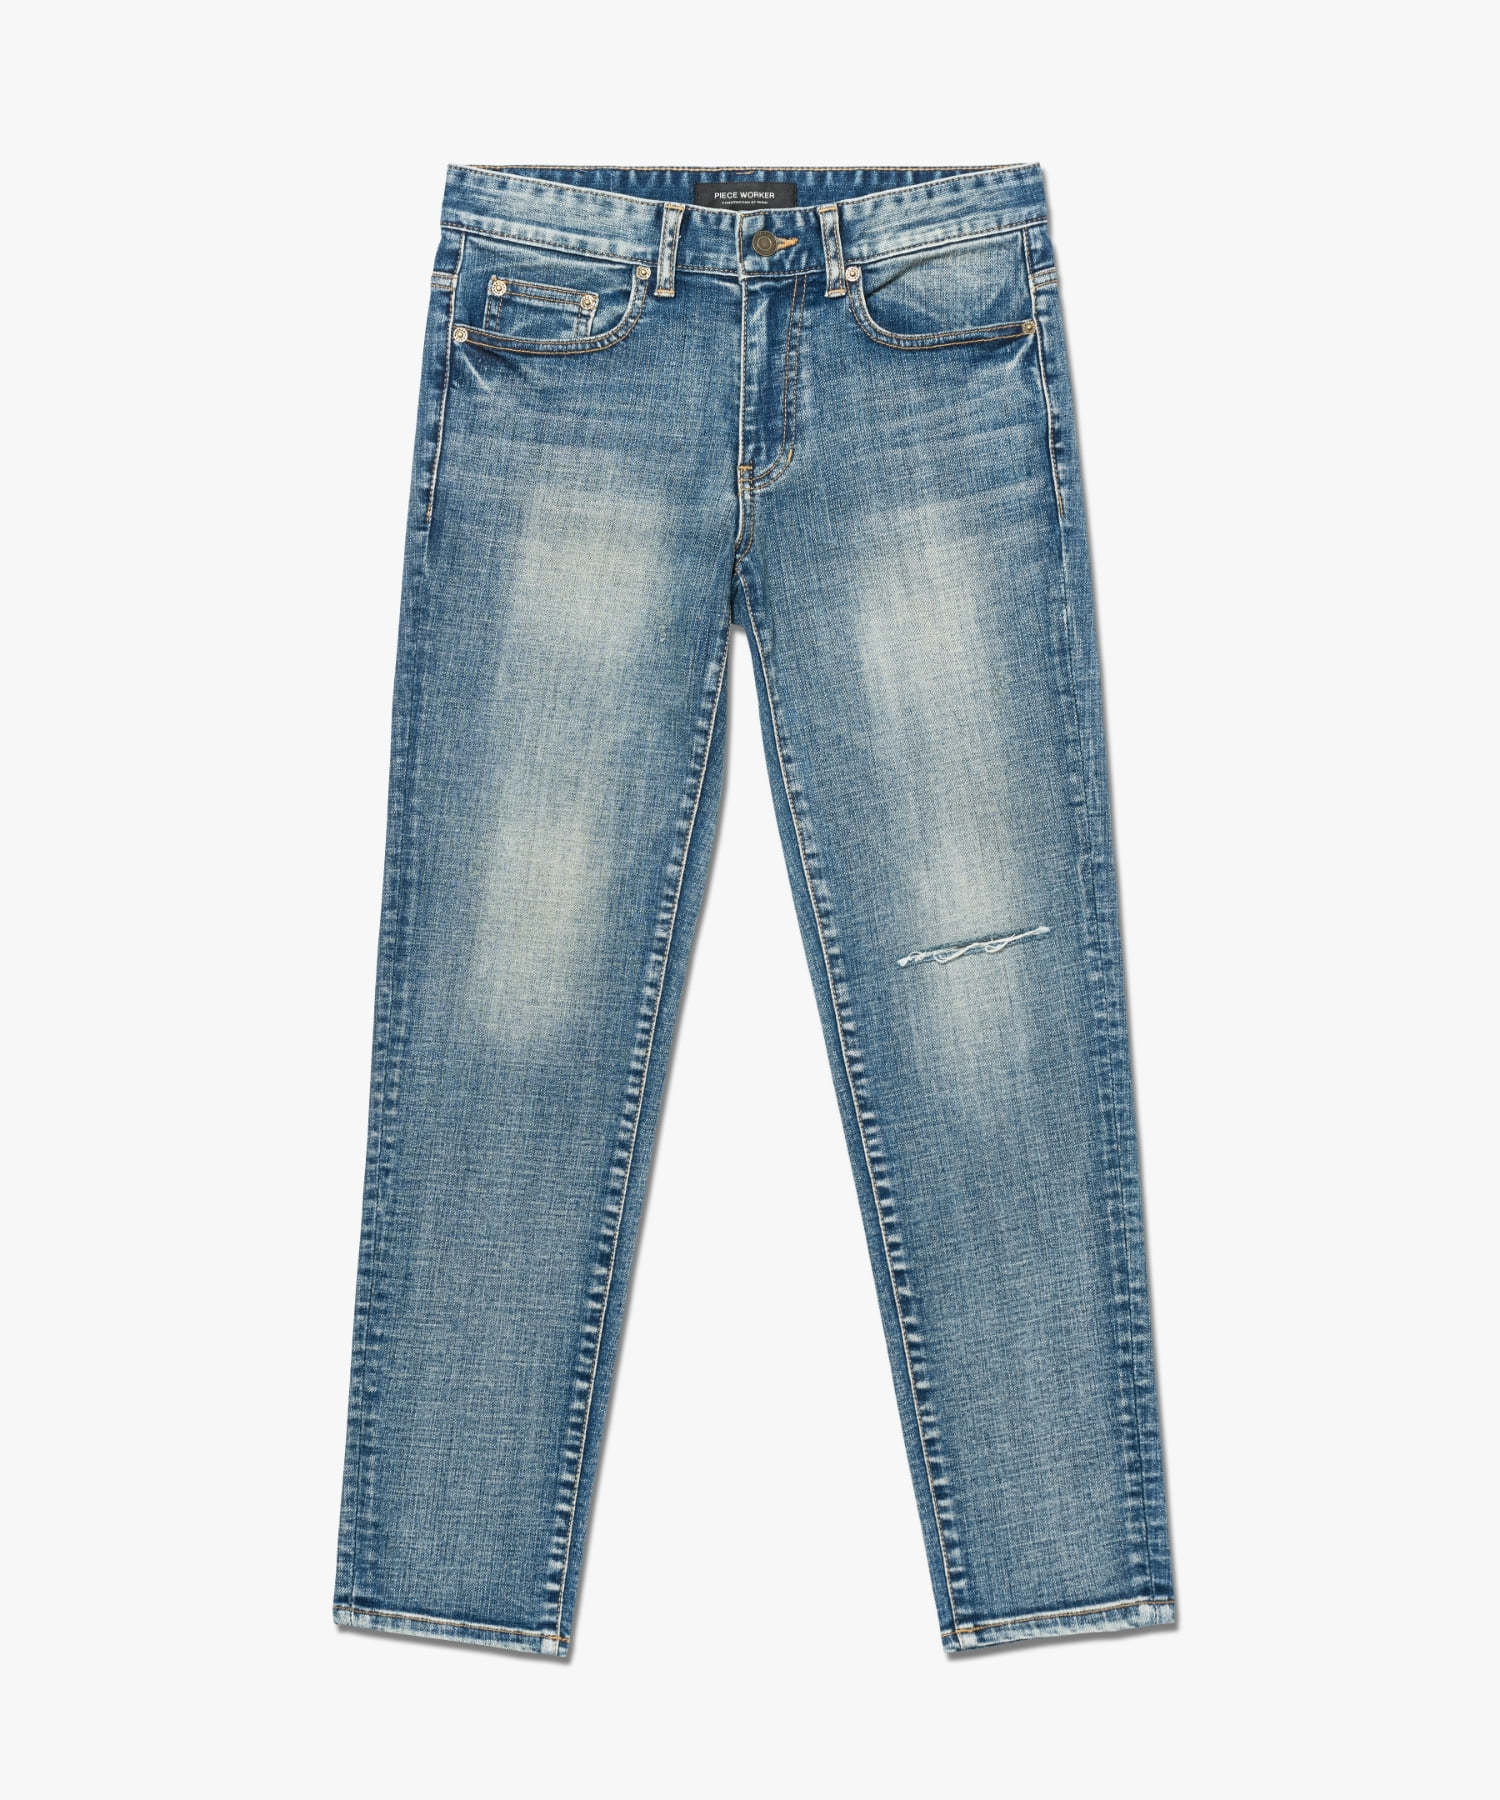 Men&amp;amp;#039;s Stone Washed Cropped Jeans,Men&amp;amp;#039;s Washed Cropped Jeans,Men&amp;amp;#039;s Stone Cropped Jeans